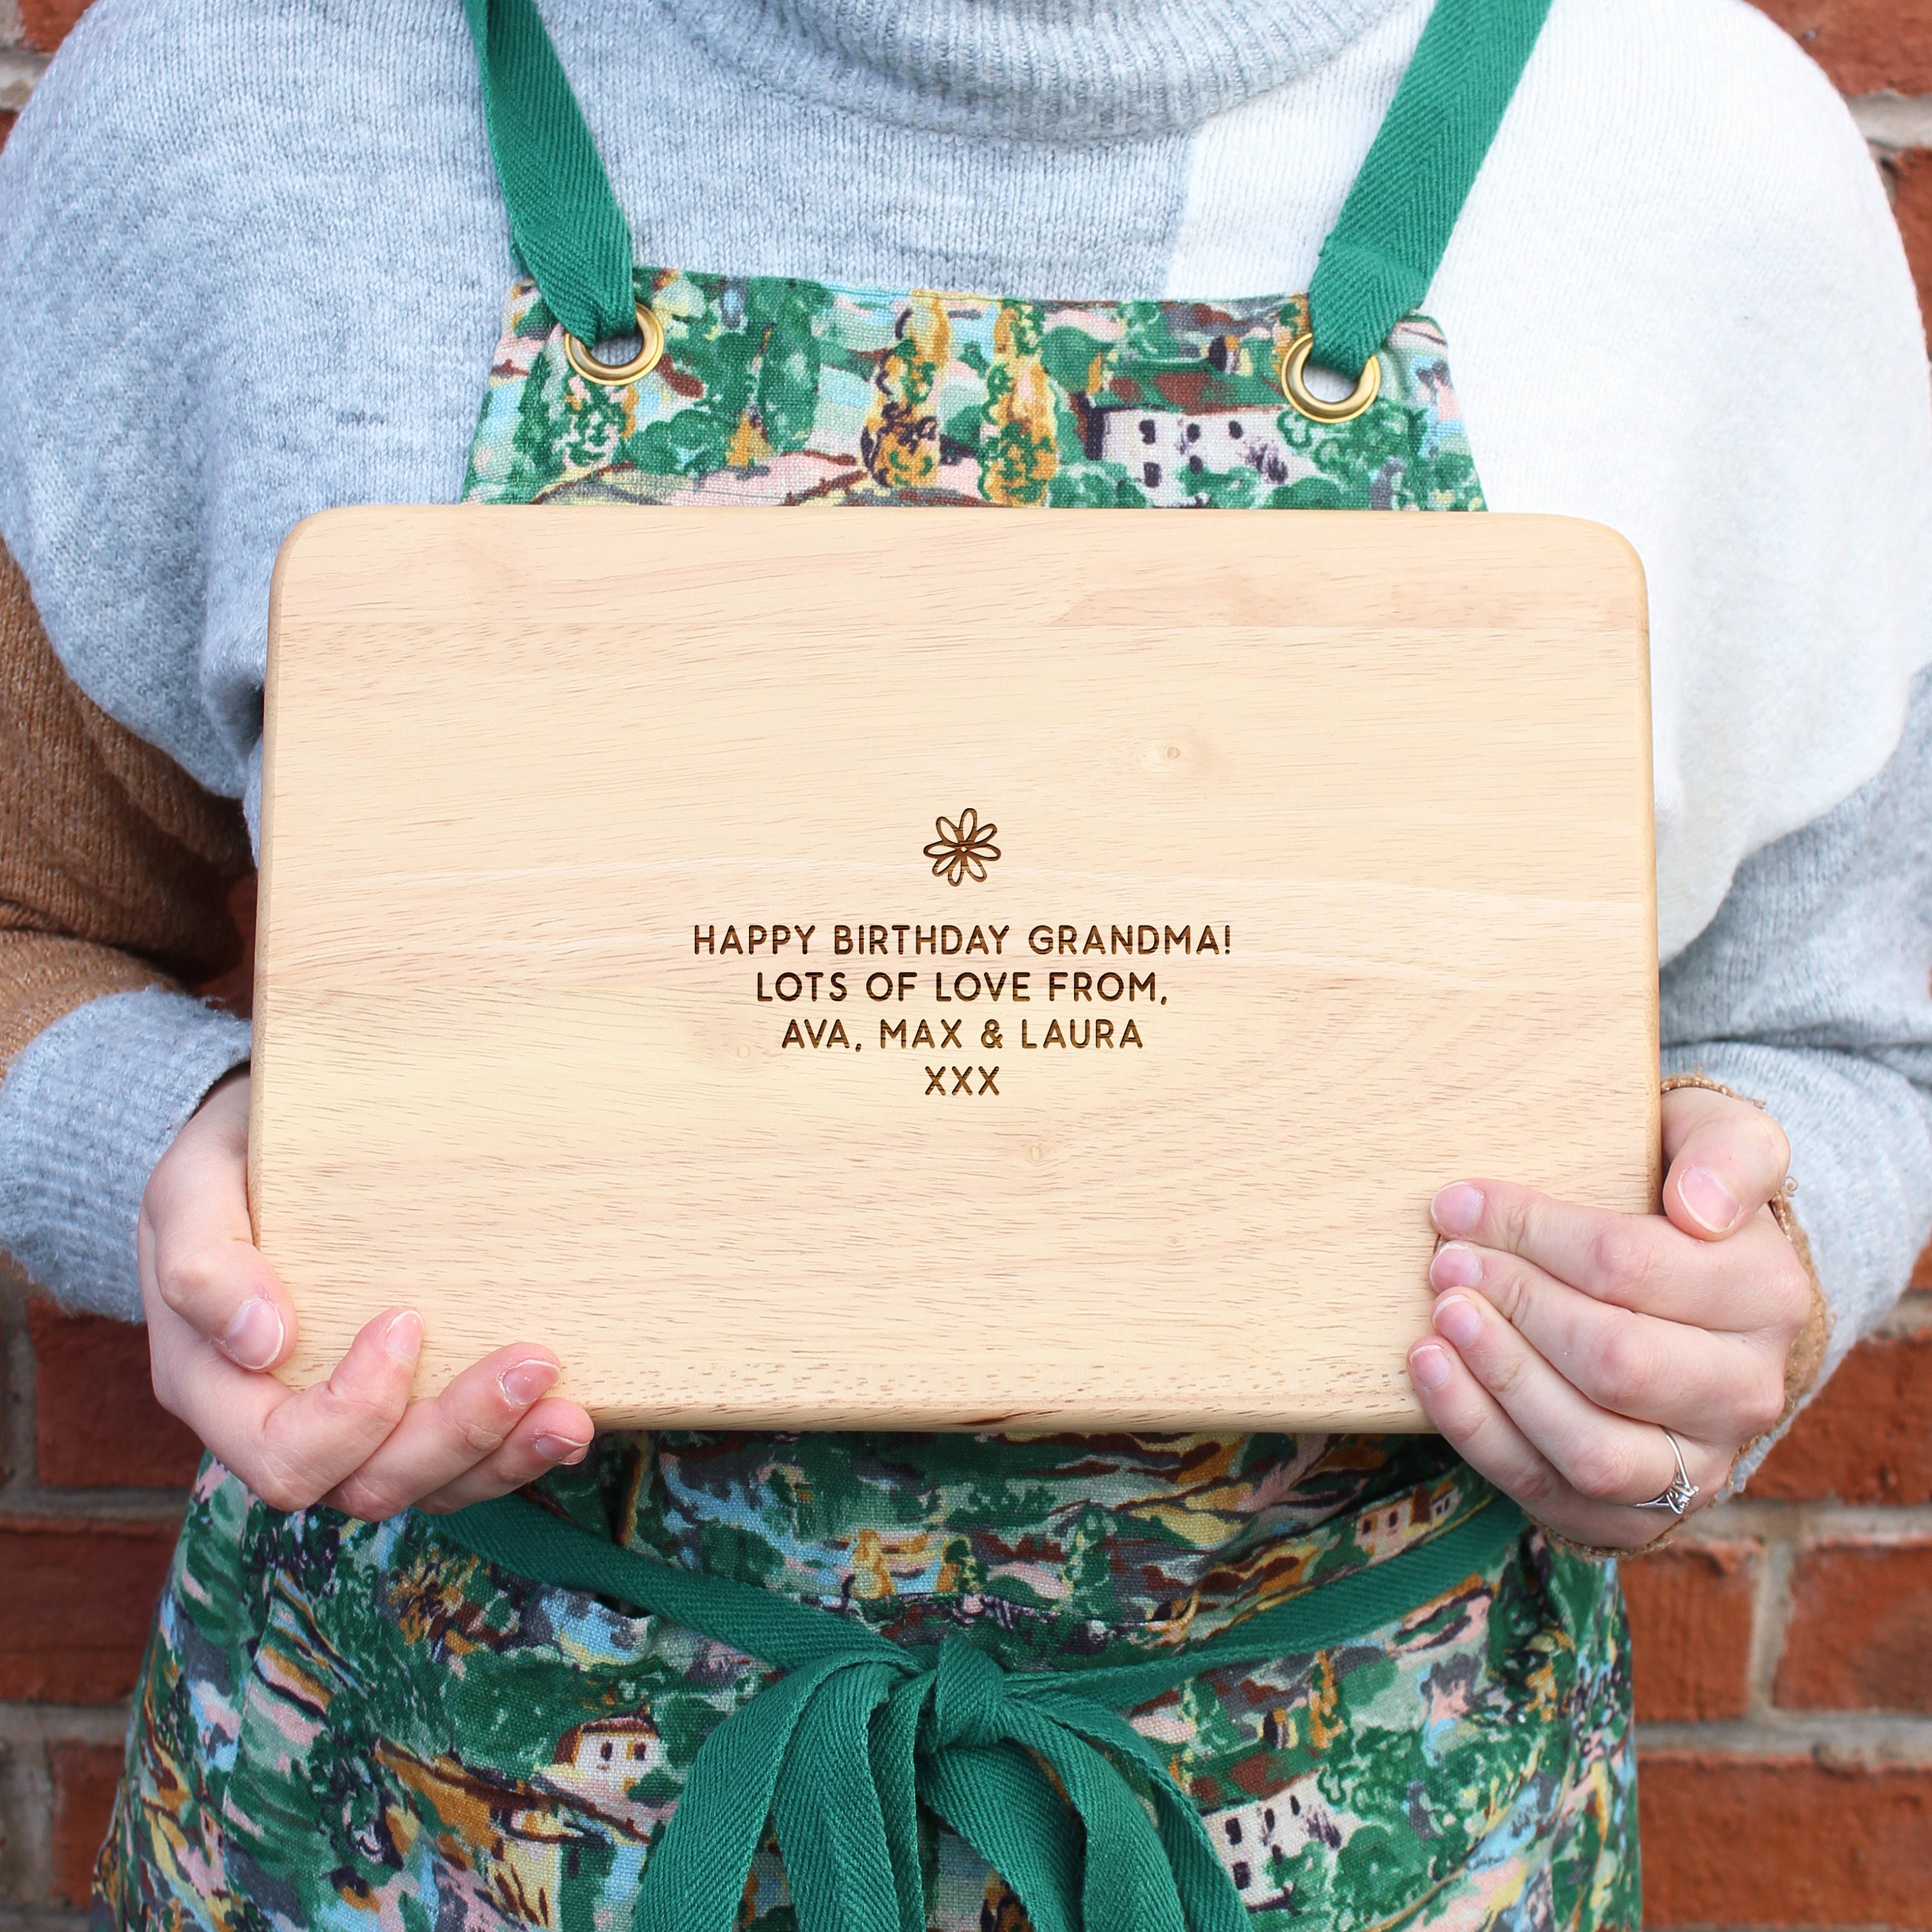 Personalised Wooden Cutting Board, Grandma&#39;s Kitchen, Where Everything Is Made With Love, Birthday, Mother&#39;s Day Gift for Nana, Granny